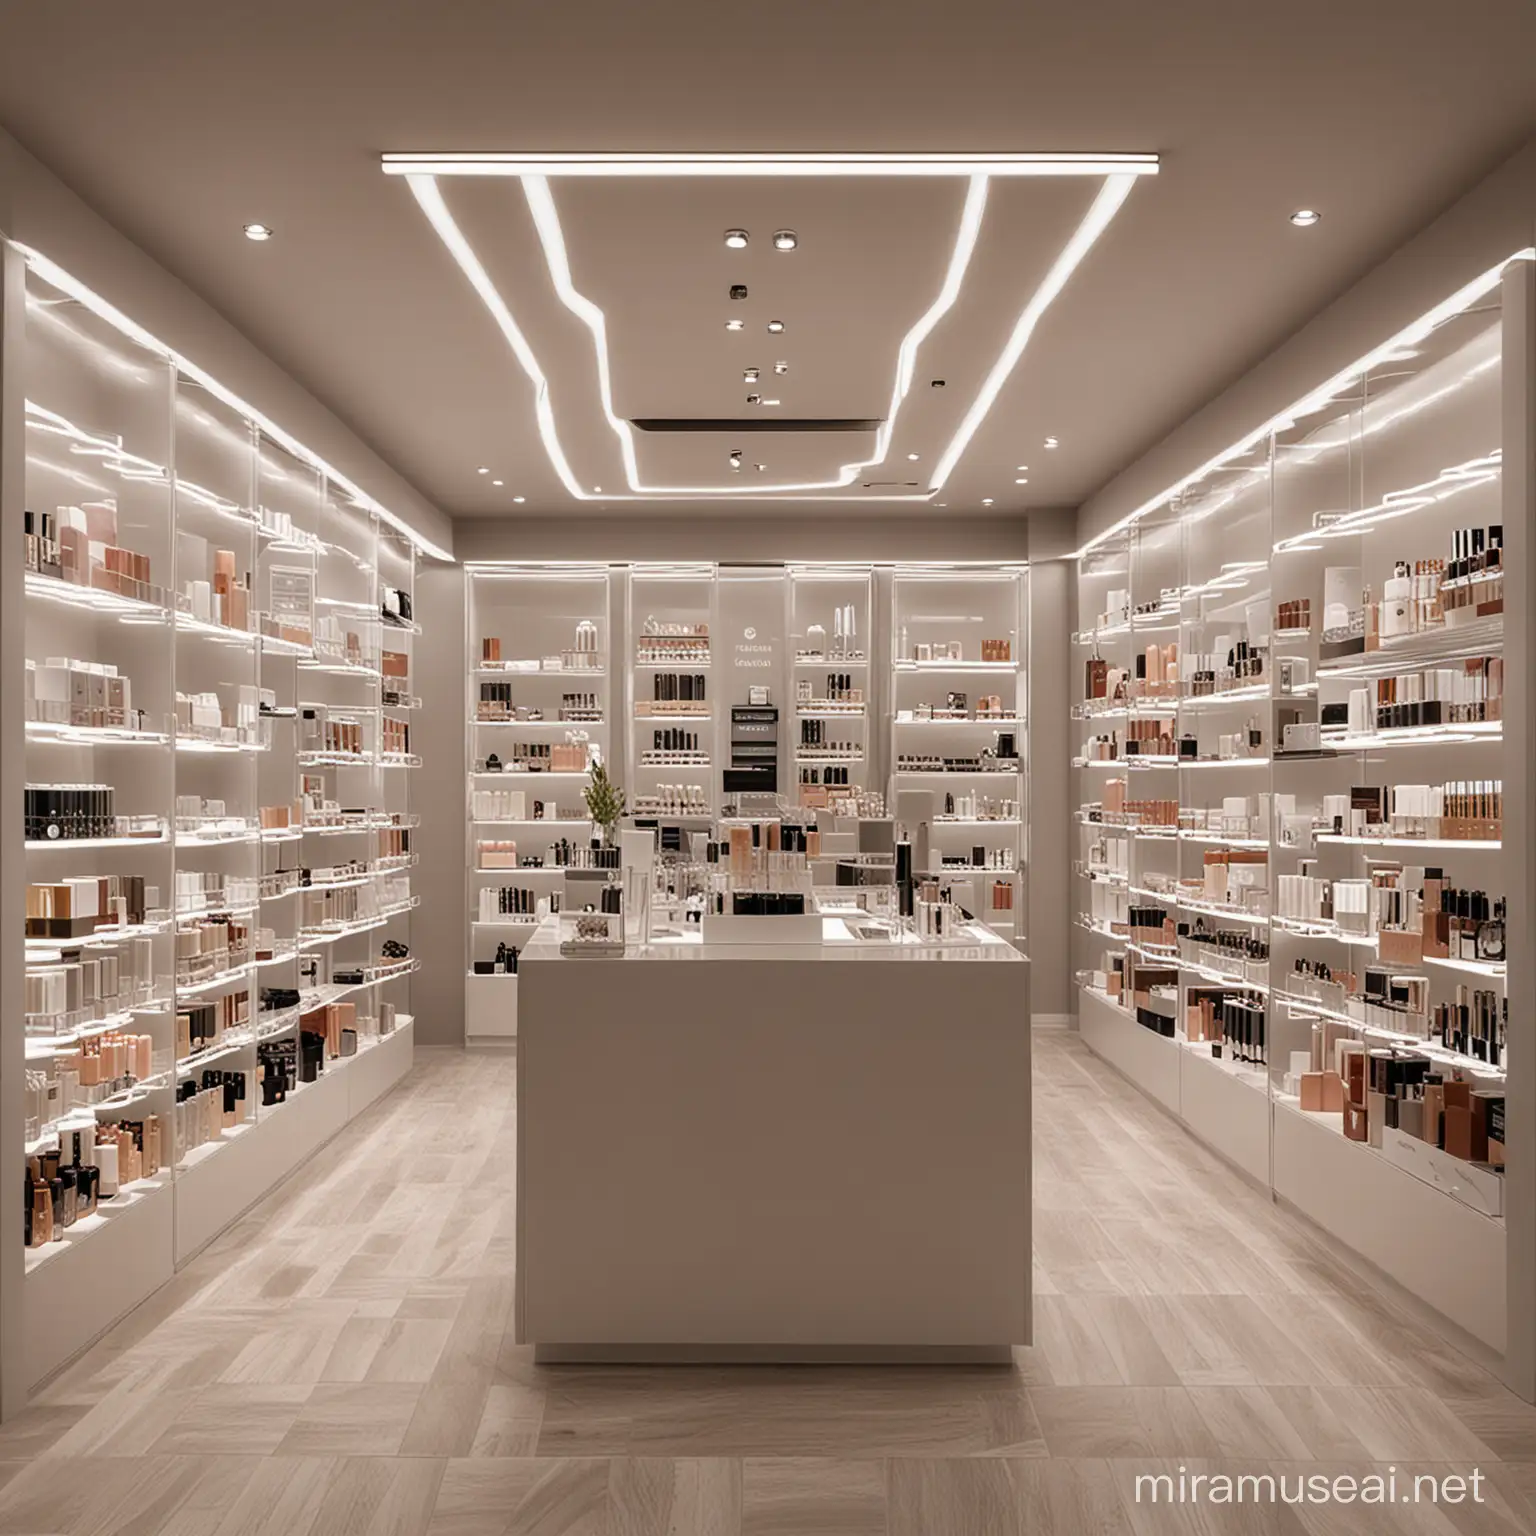 "Design a stylish perfume store in a compact 300 sqft space. Consider efficient layout, eye-catching product displays, cohesive branding, strategic lighting, personalized customer experience, smart storage solutions, and possible technology integration. Create an elegant and inviting atmosphere that captivates customers and provides a memorable shopping experience."